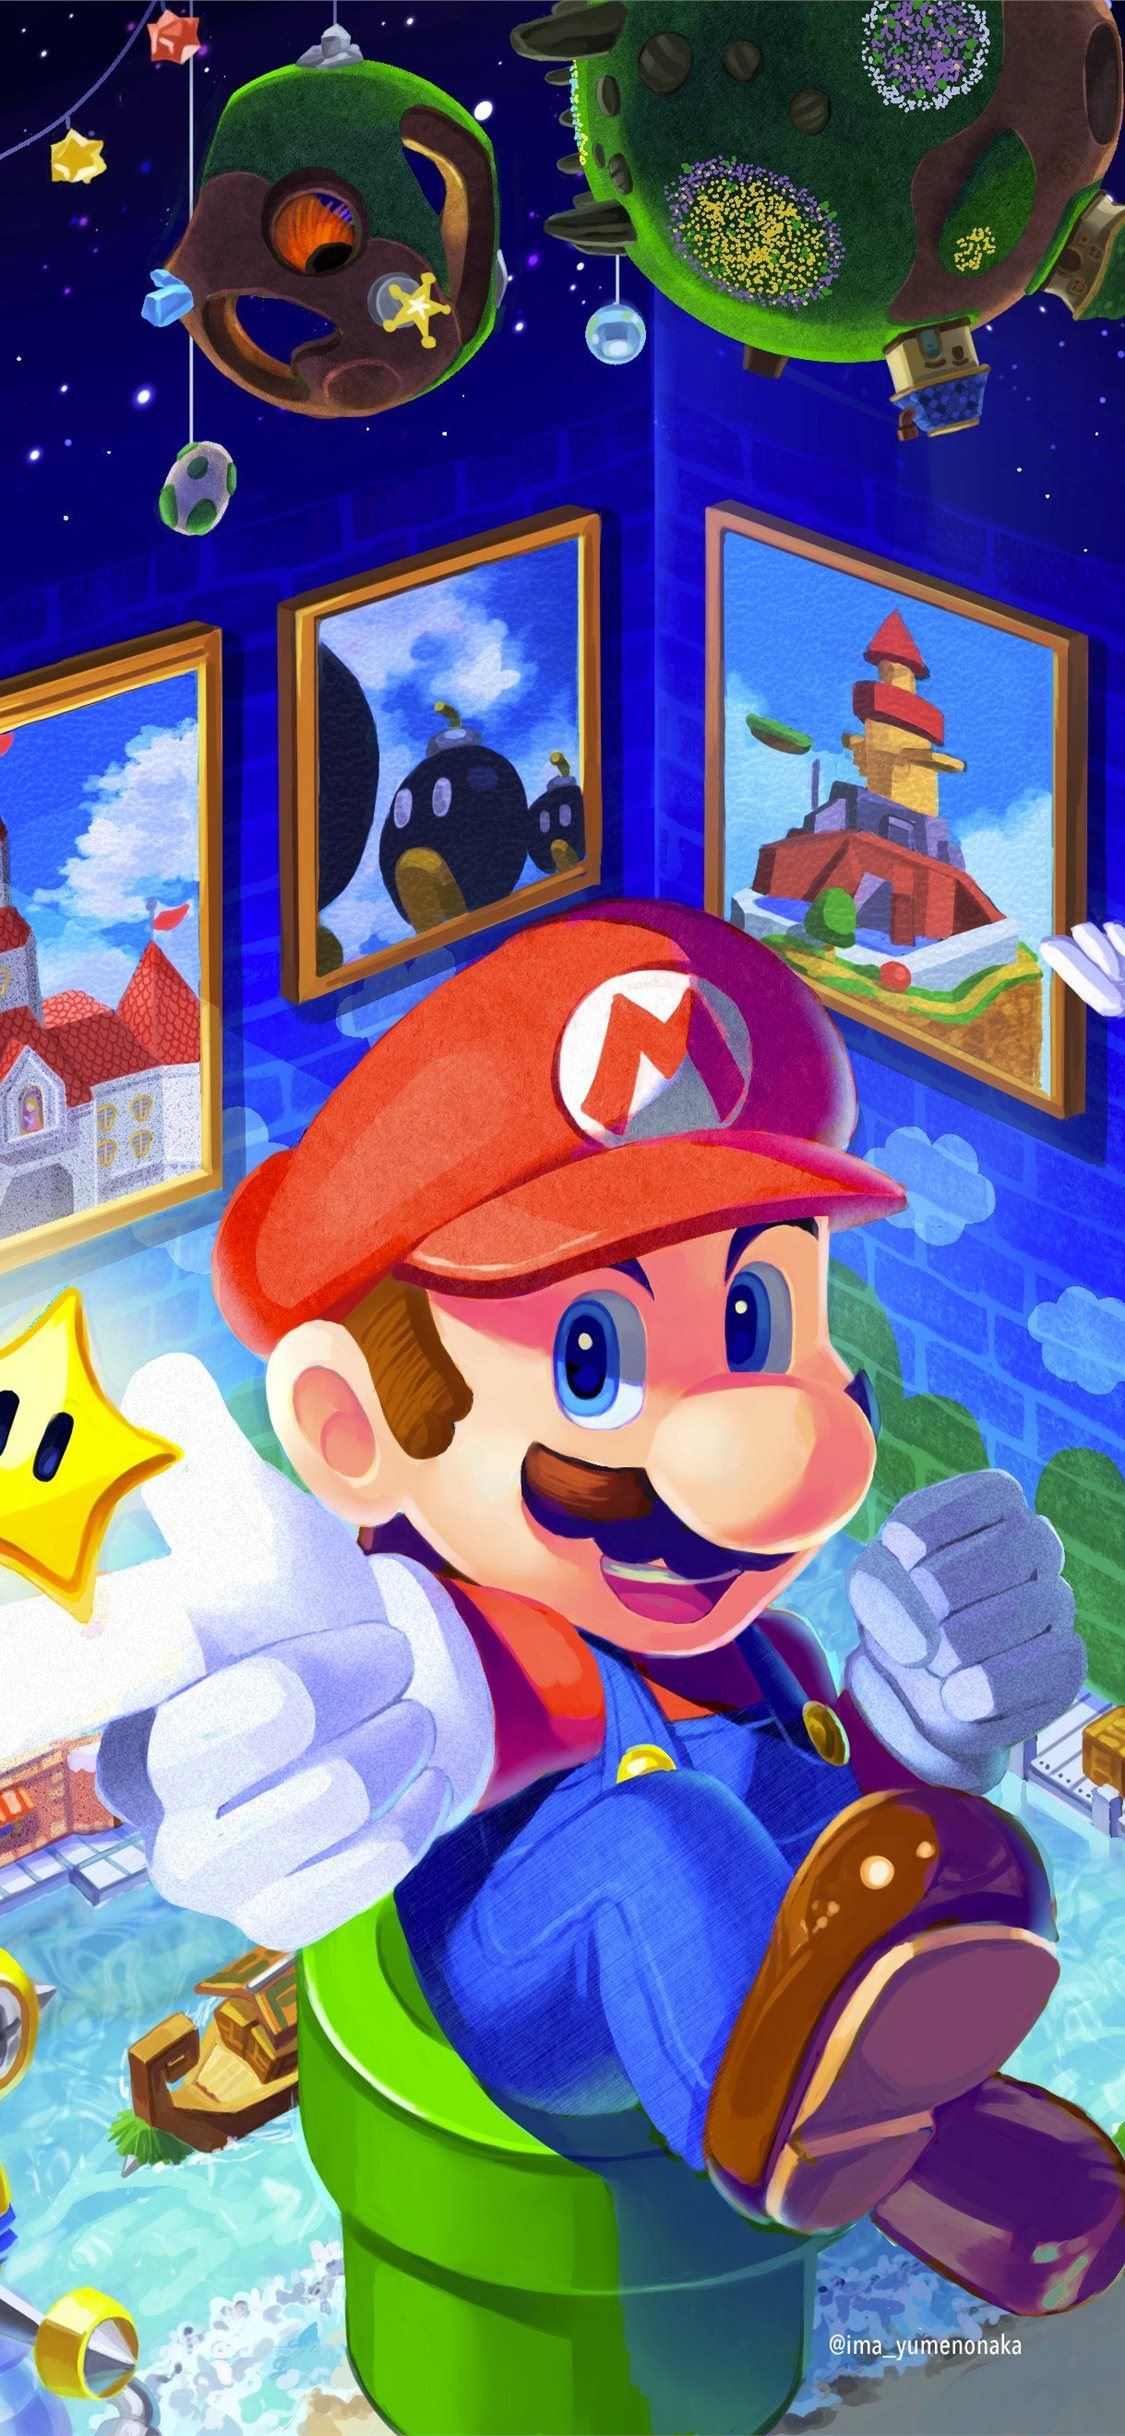 The nintendo character mario is sitting on a toilet - 